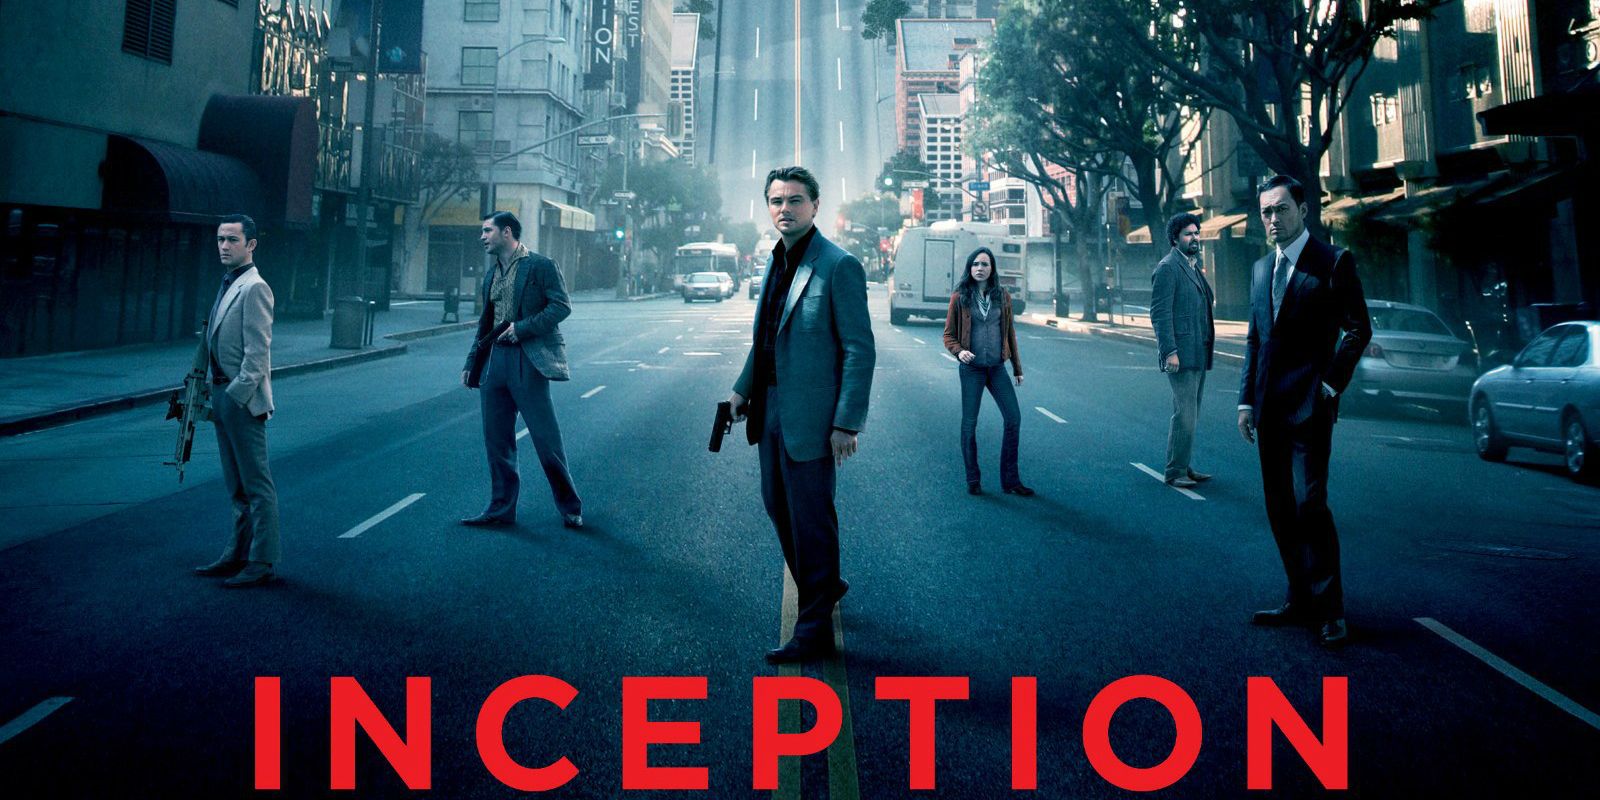 Inception Poster